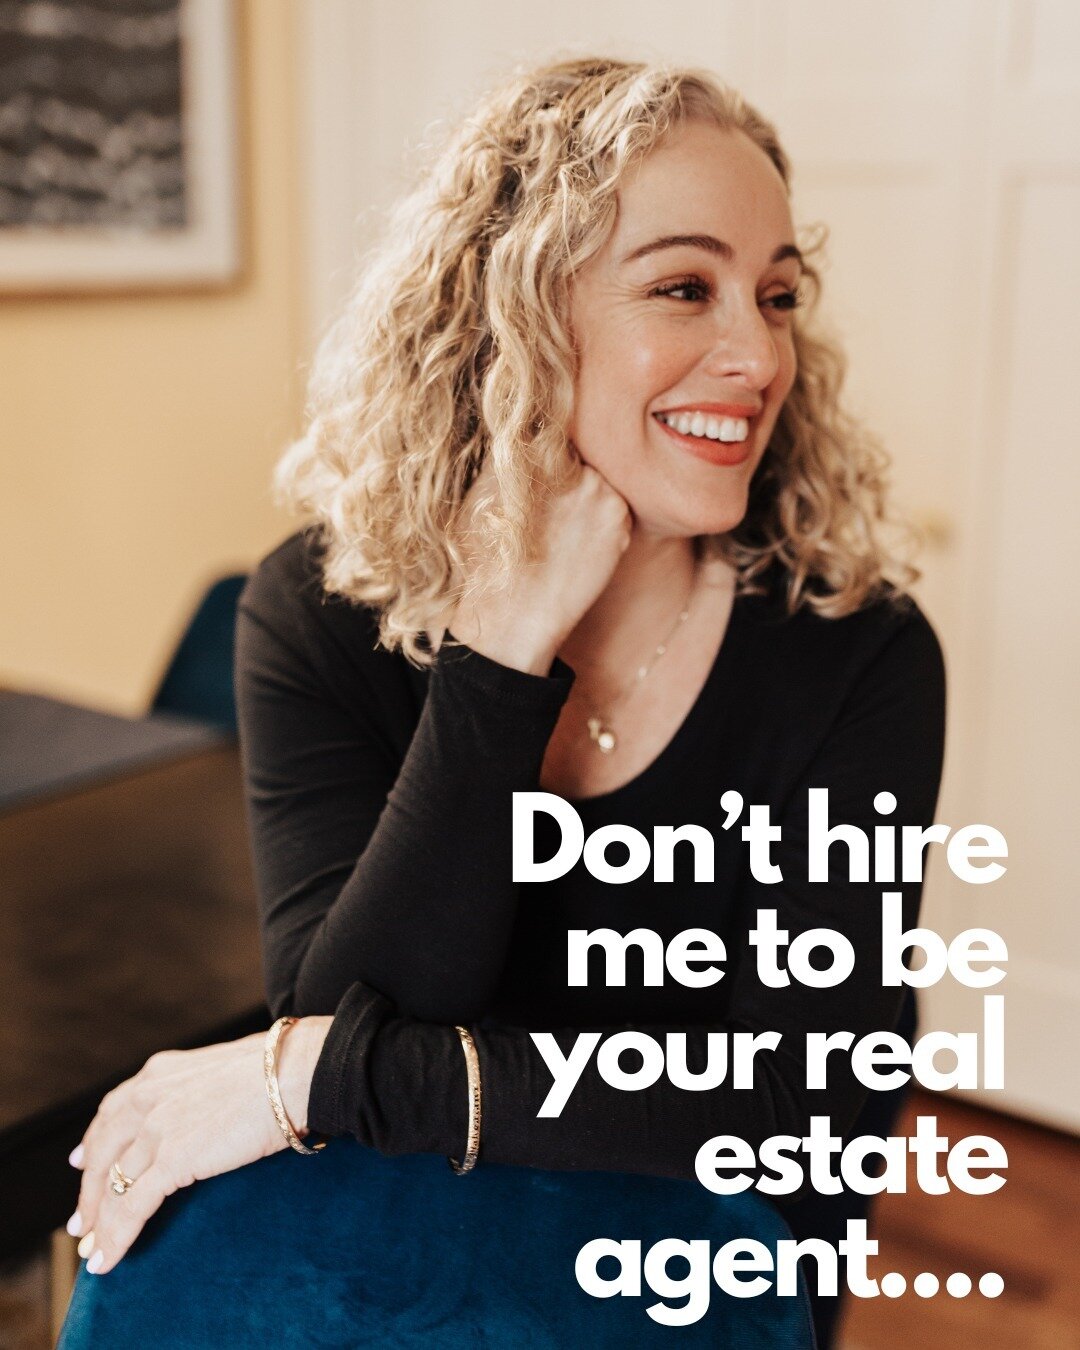 I love to work with so many different types of people. It's one of the best parts of my profession. And I am not for everyone but I could be for you. ⁠
⁠
⁠If you need a hard-working, honest, smart real estate agent, call me. ⁠
⁠
⁠
And when I say &quo